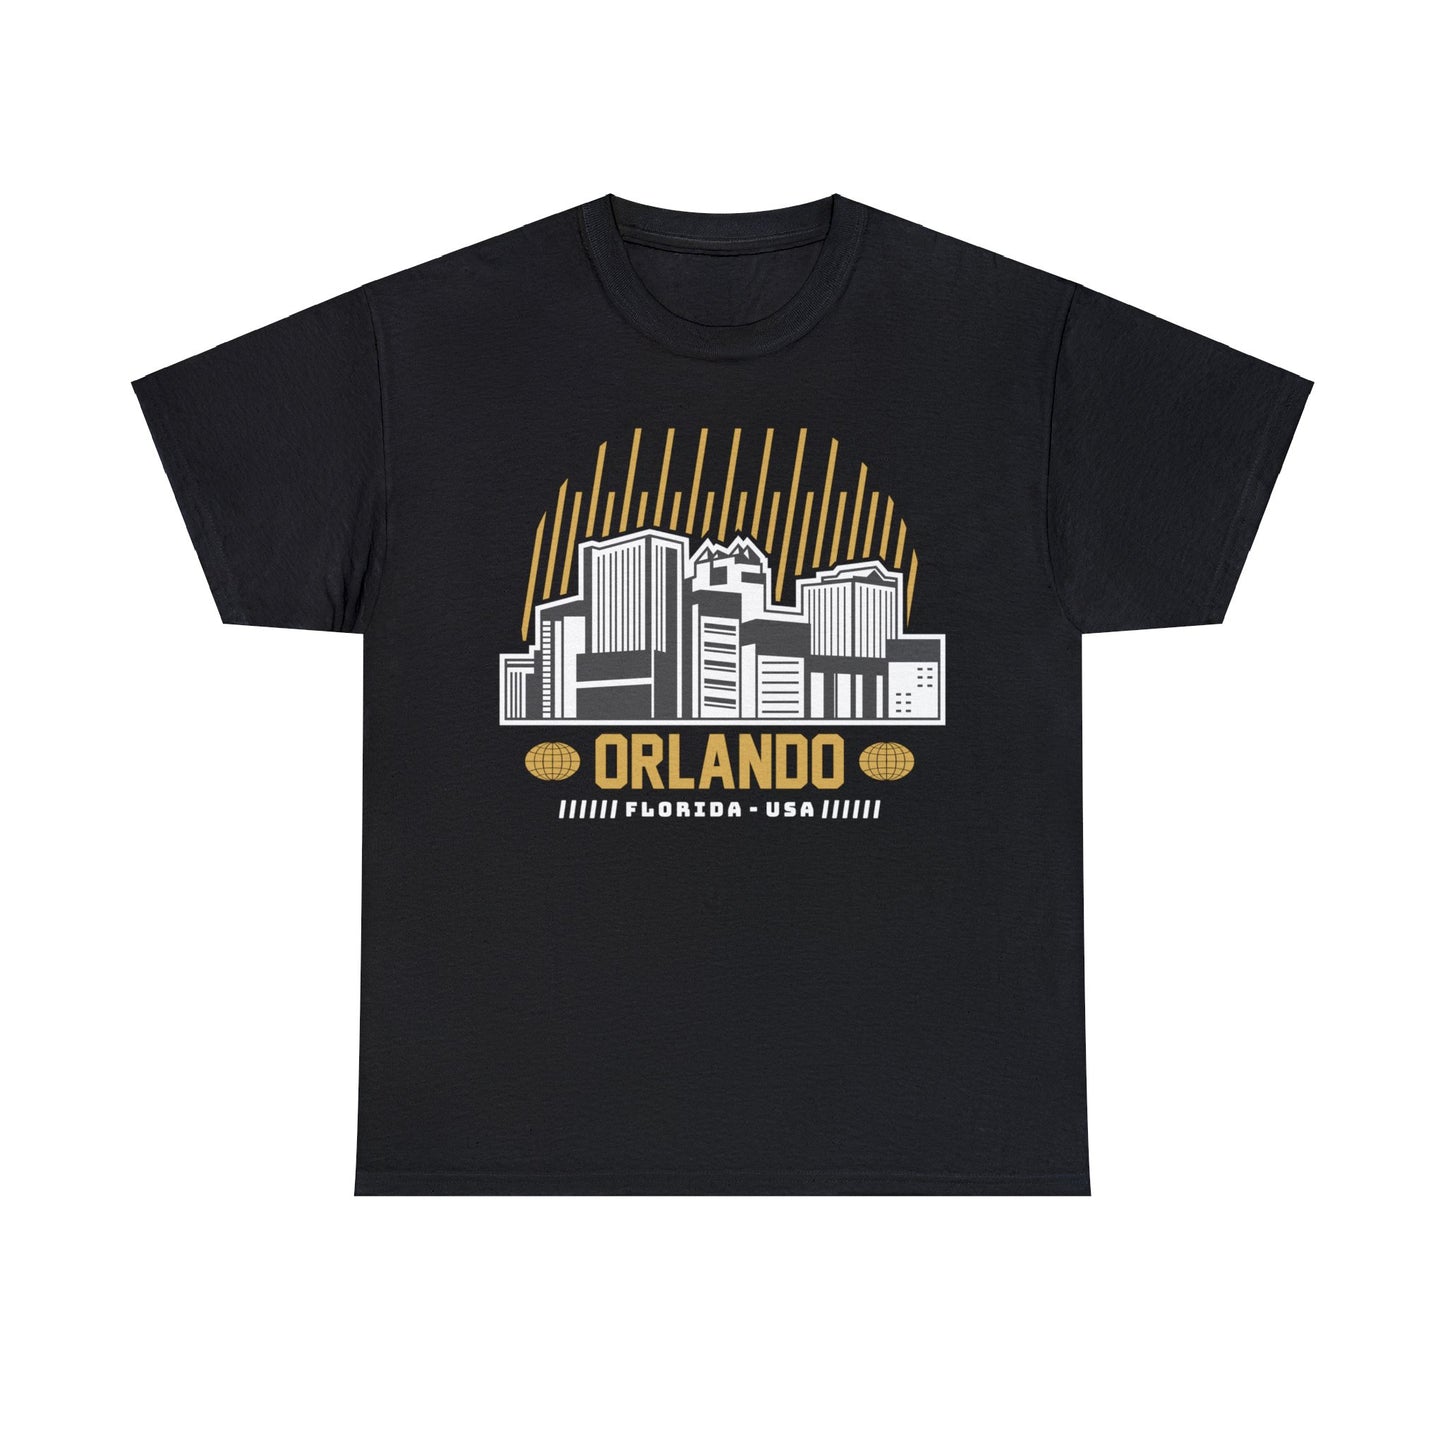 Discover Magic in Style with Our Orlando-Inspired T-Shirt